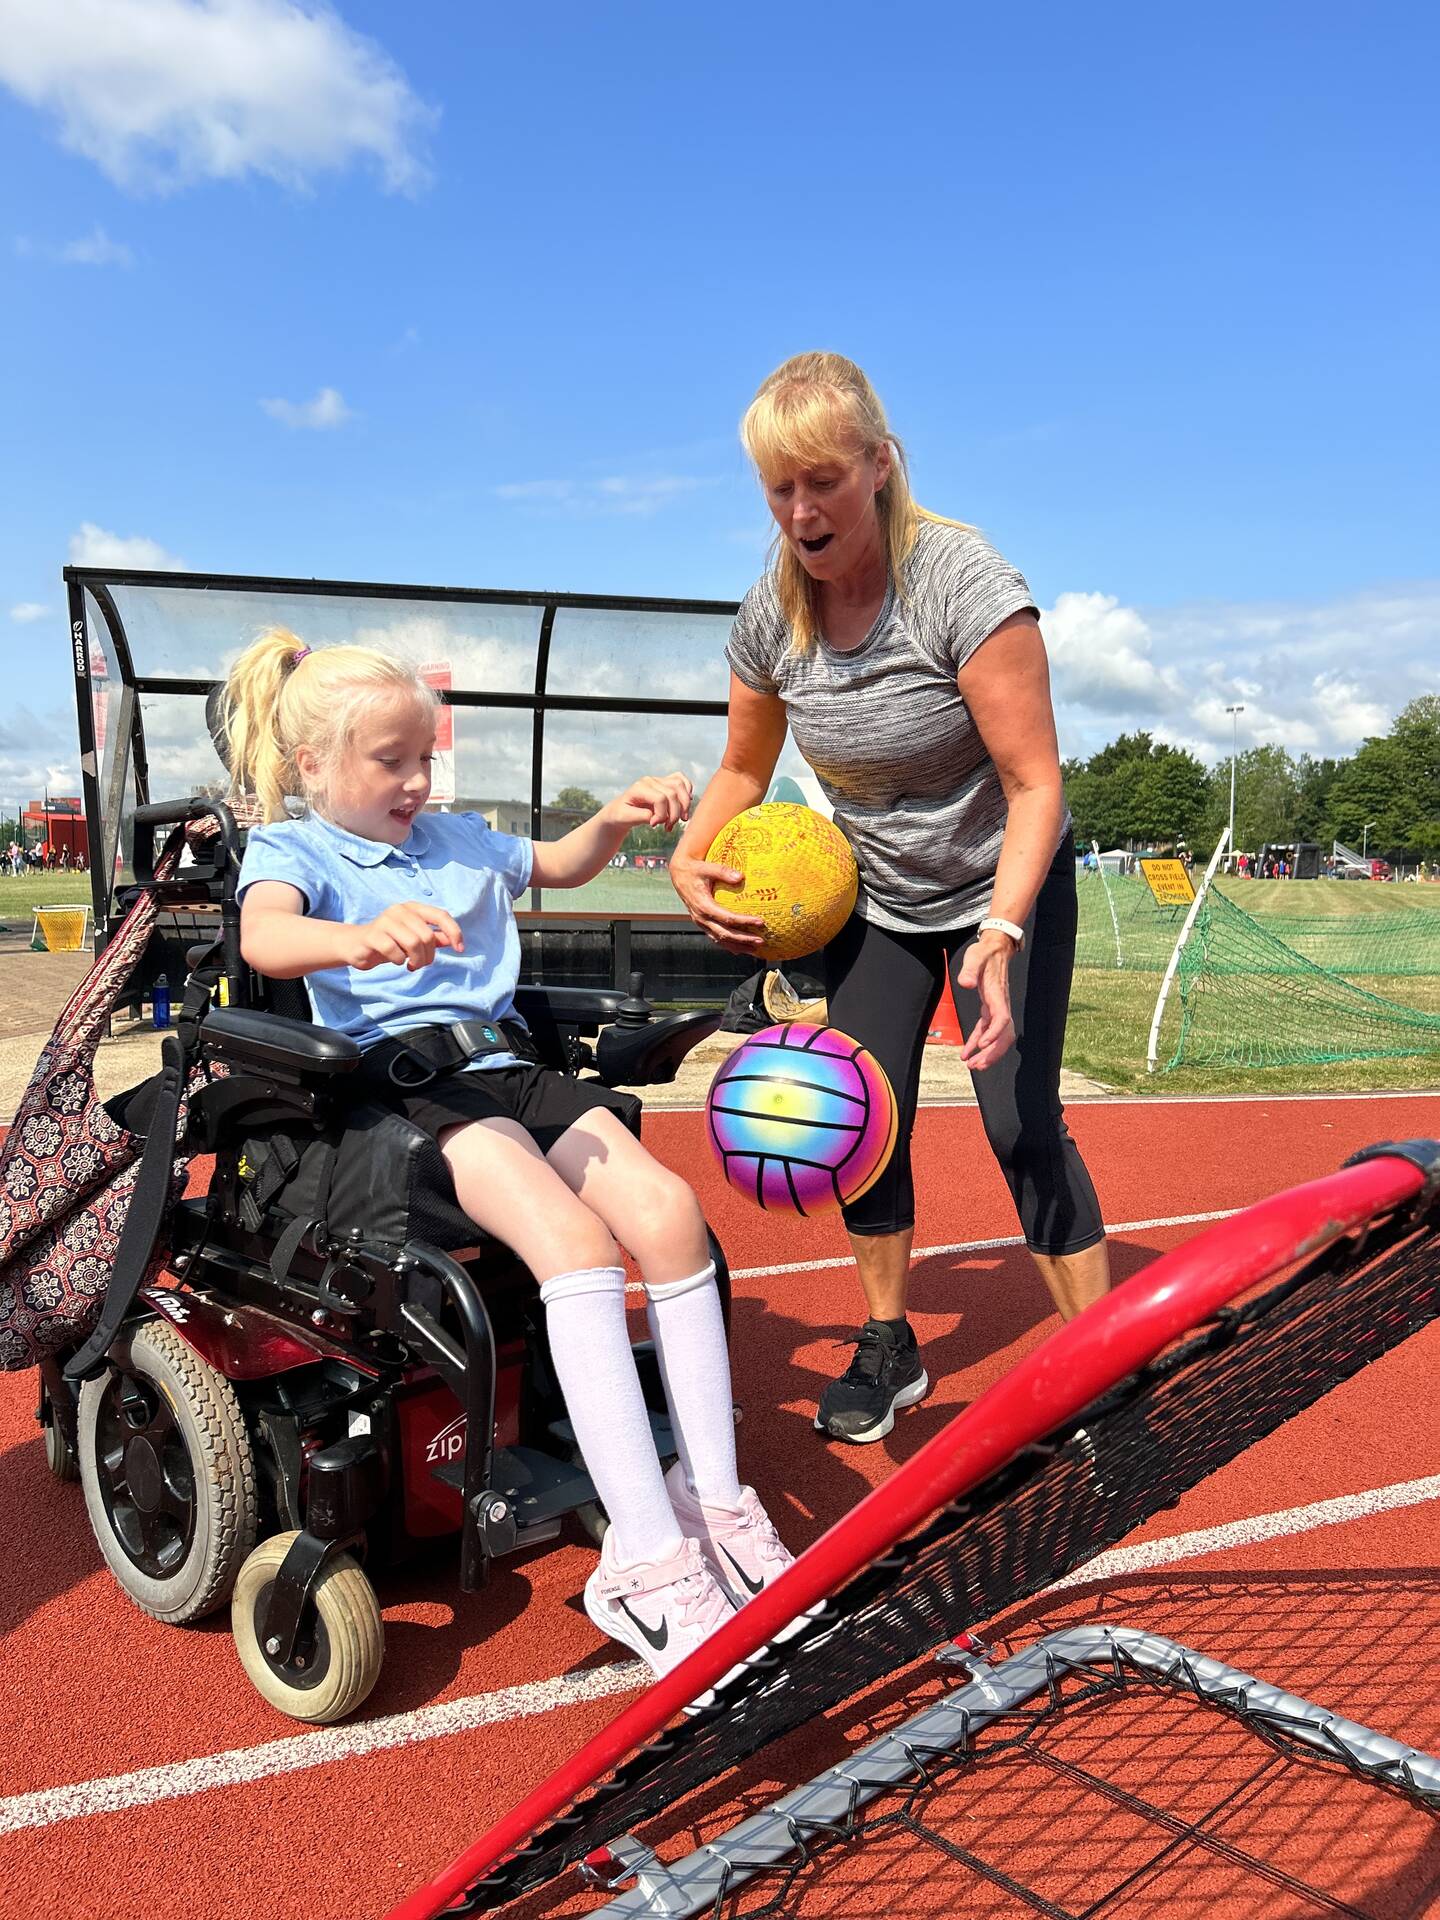 Disabled girl and woman playing with a net and a sports ball on an athletics track. 